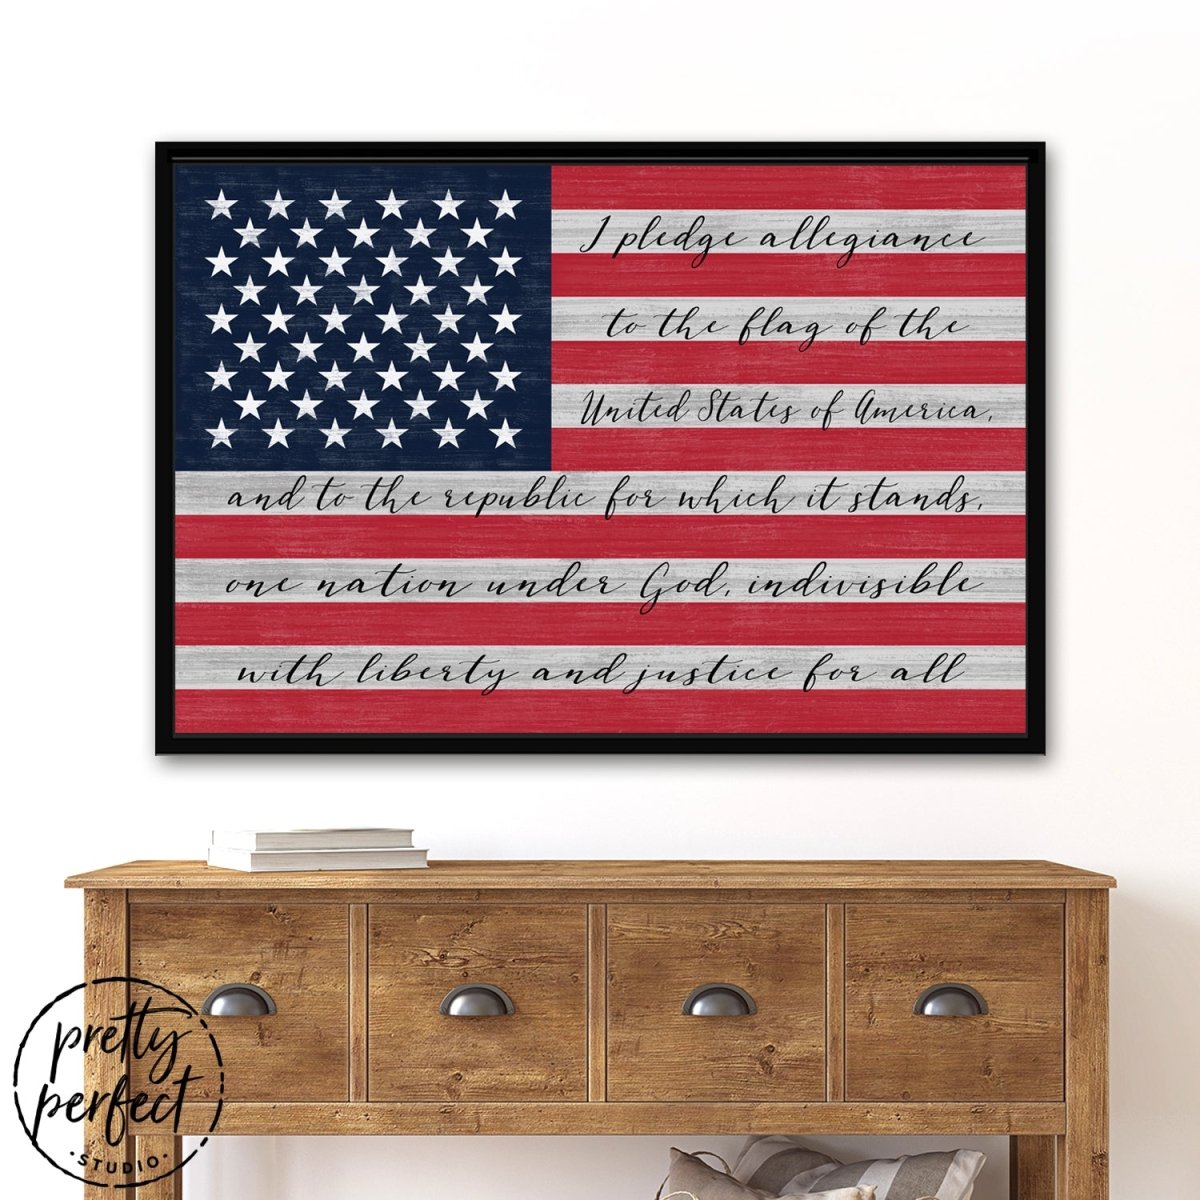 American Flag with Pledge of Allegiance Sign in Entryway - Pretty Perfect Studio